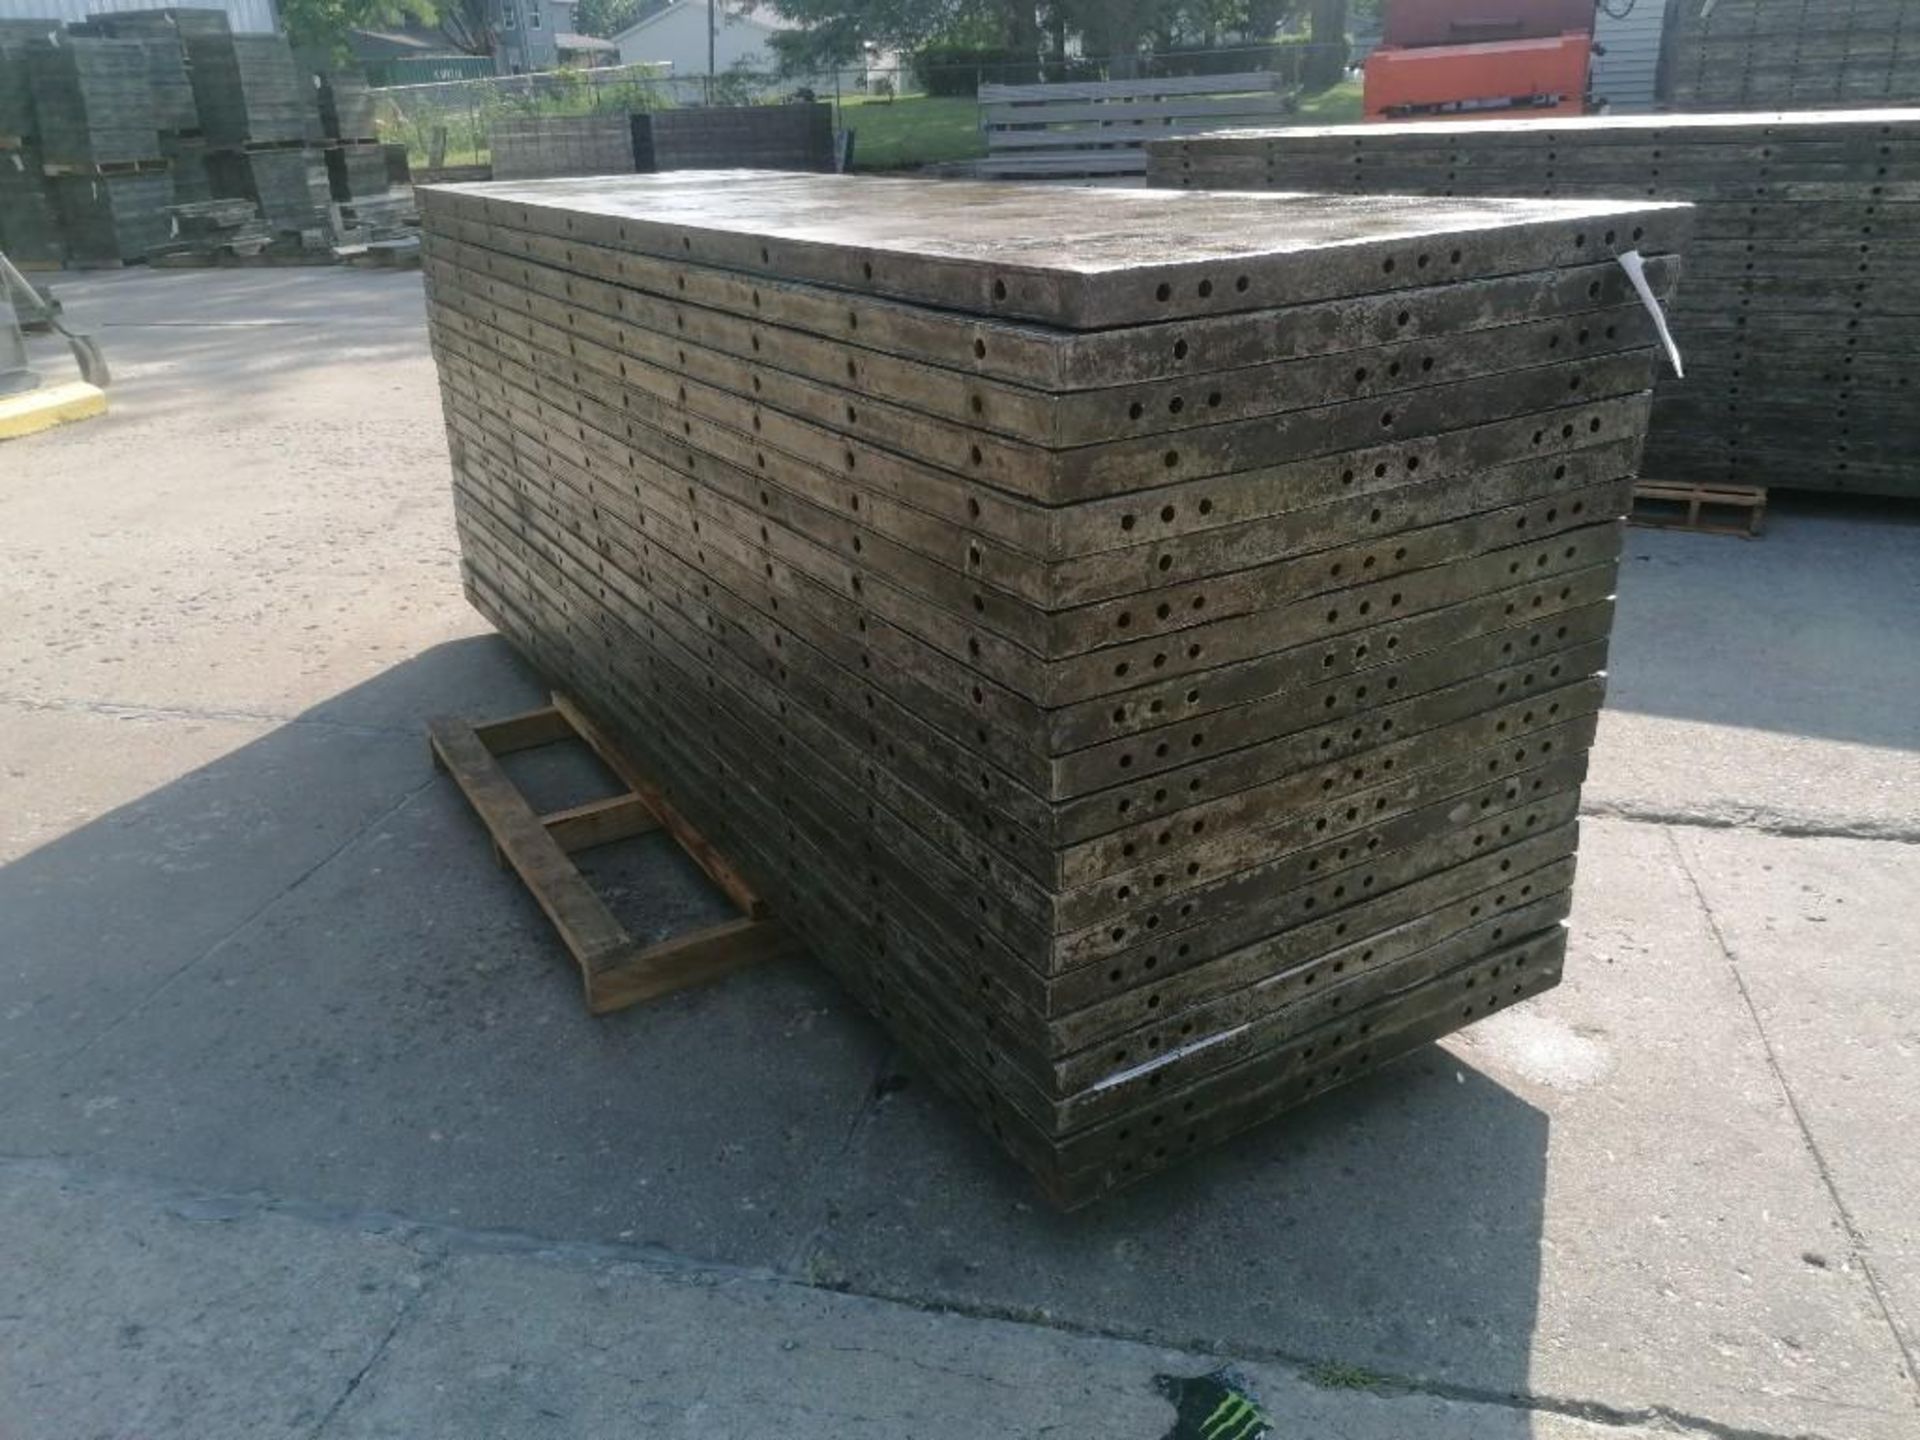 (20) 3' x 10' Wall-Ties Aluminum Concrete Forms, Smooth 6-12 Hole Pattern. Located at 301 E Henry